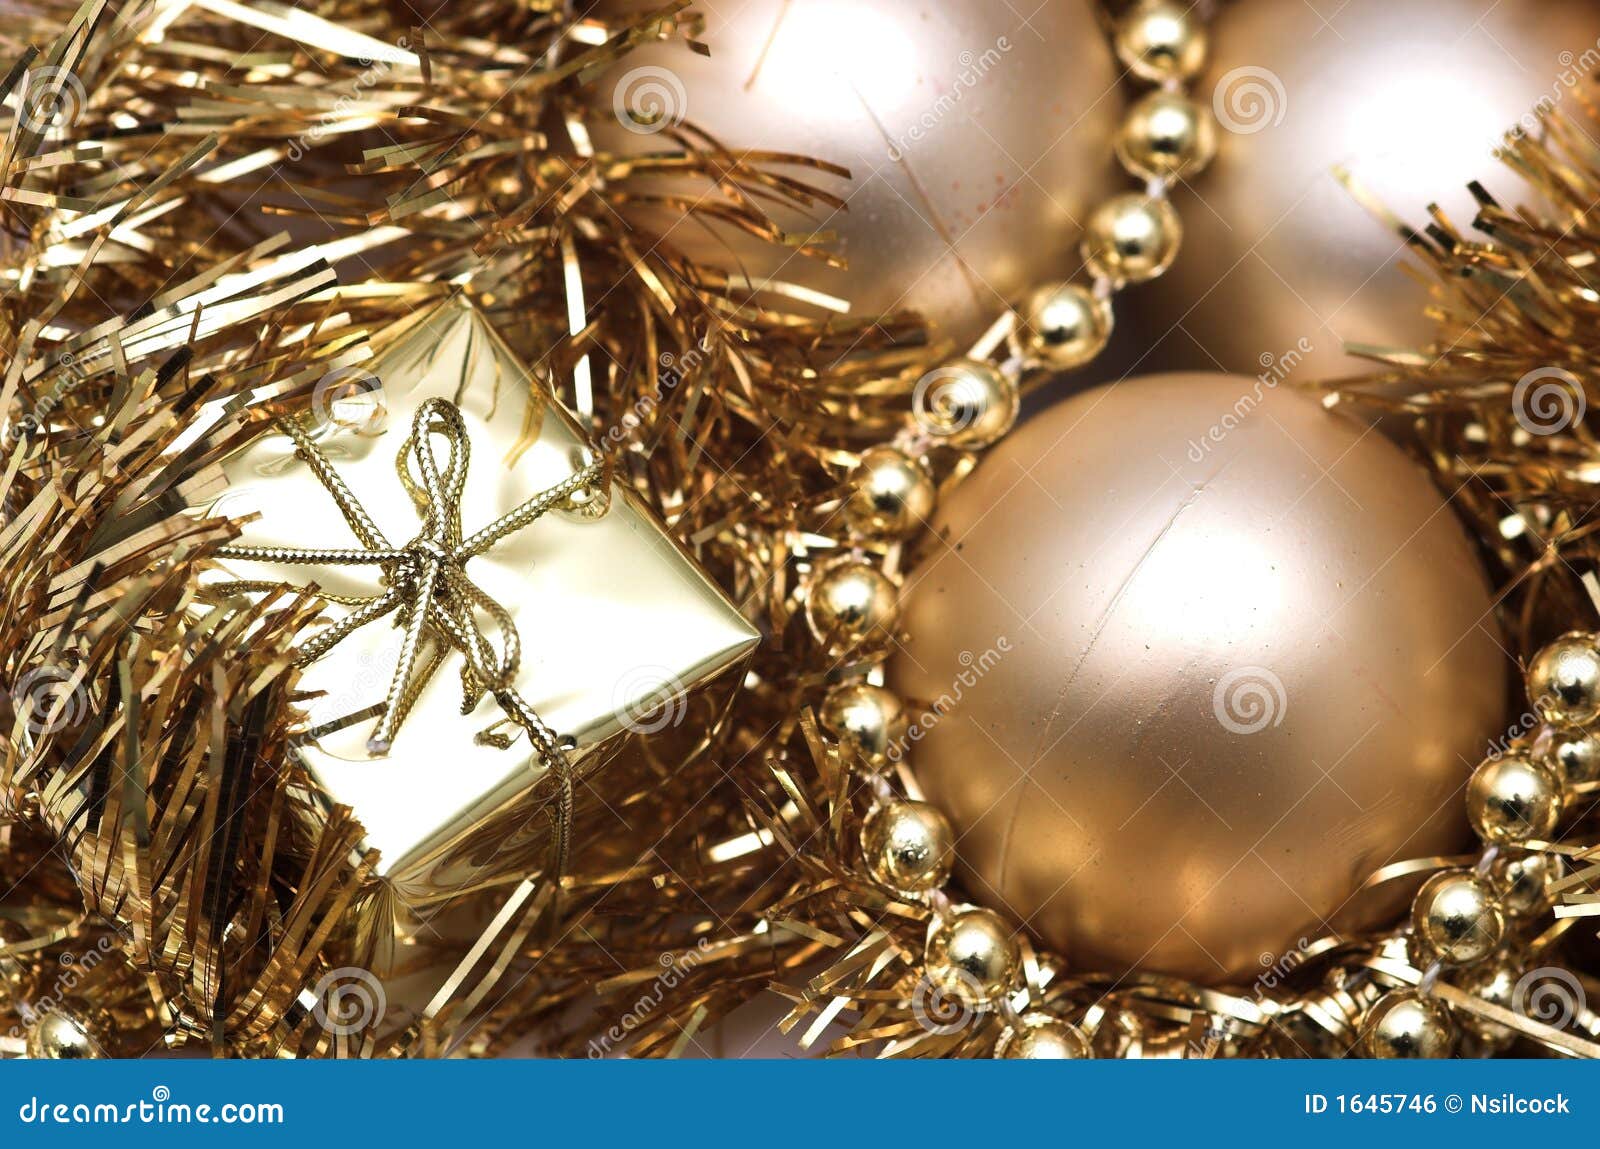 Christmas stock photo. Image of gold, compilation ...